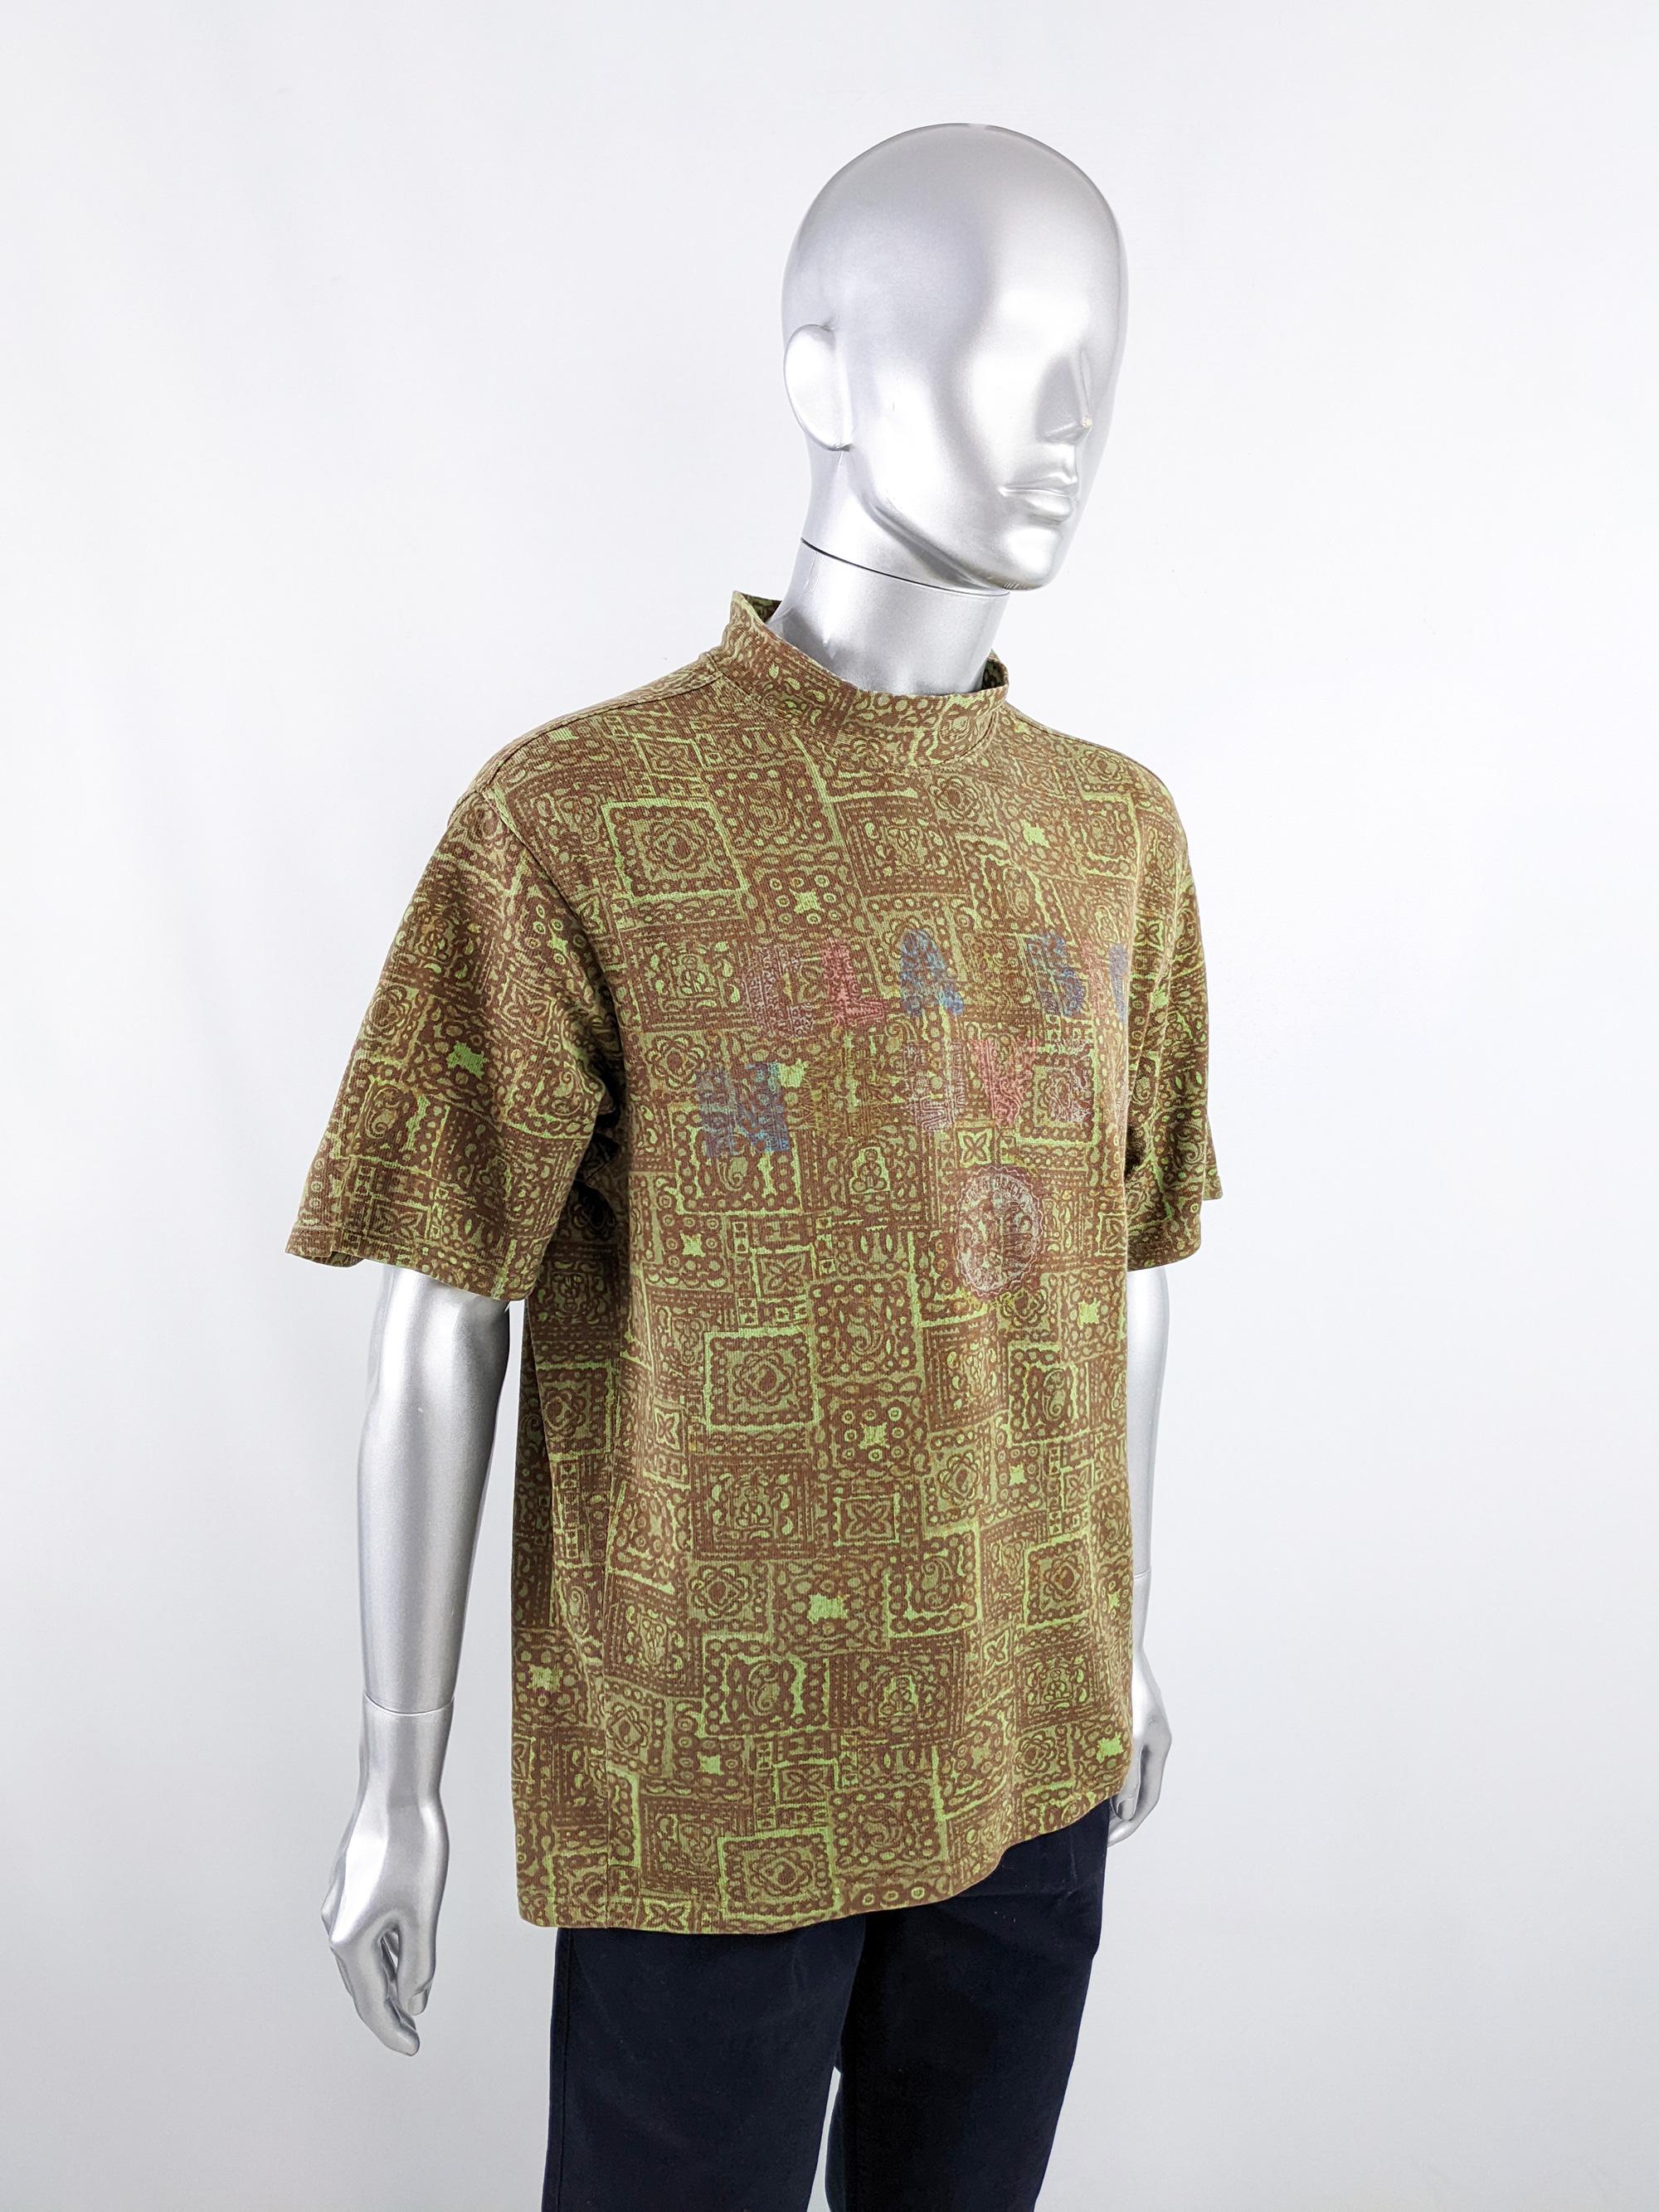 Fiorucci Vintage 1980s Green & Brown Surfer Aztec TShirt Rave Tee Shirt In Excellent Condition For Sale In Doncaster, South Yorkshire